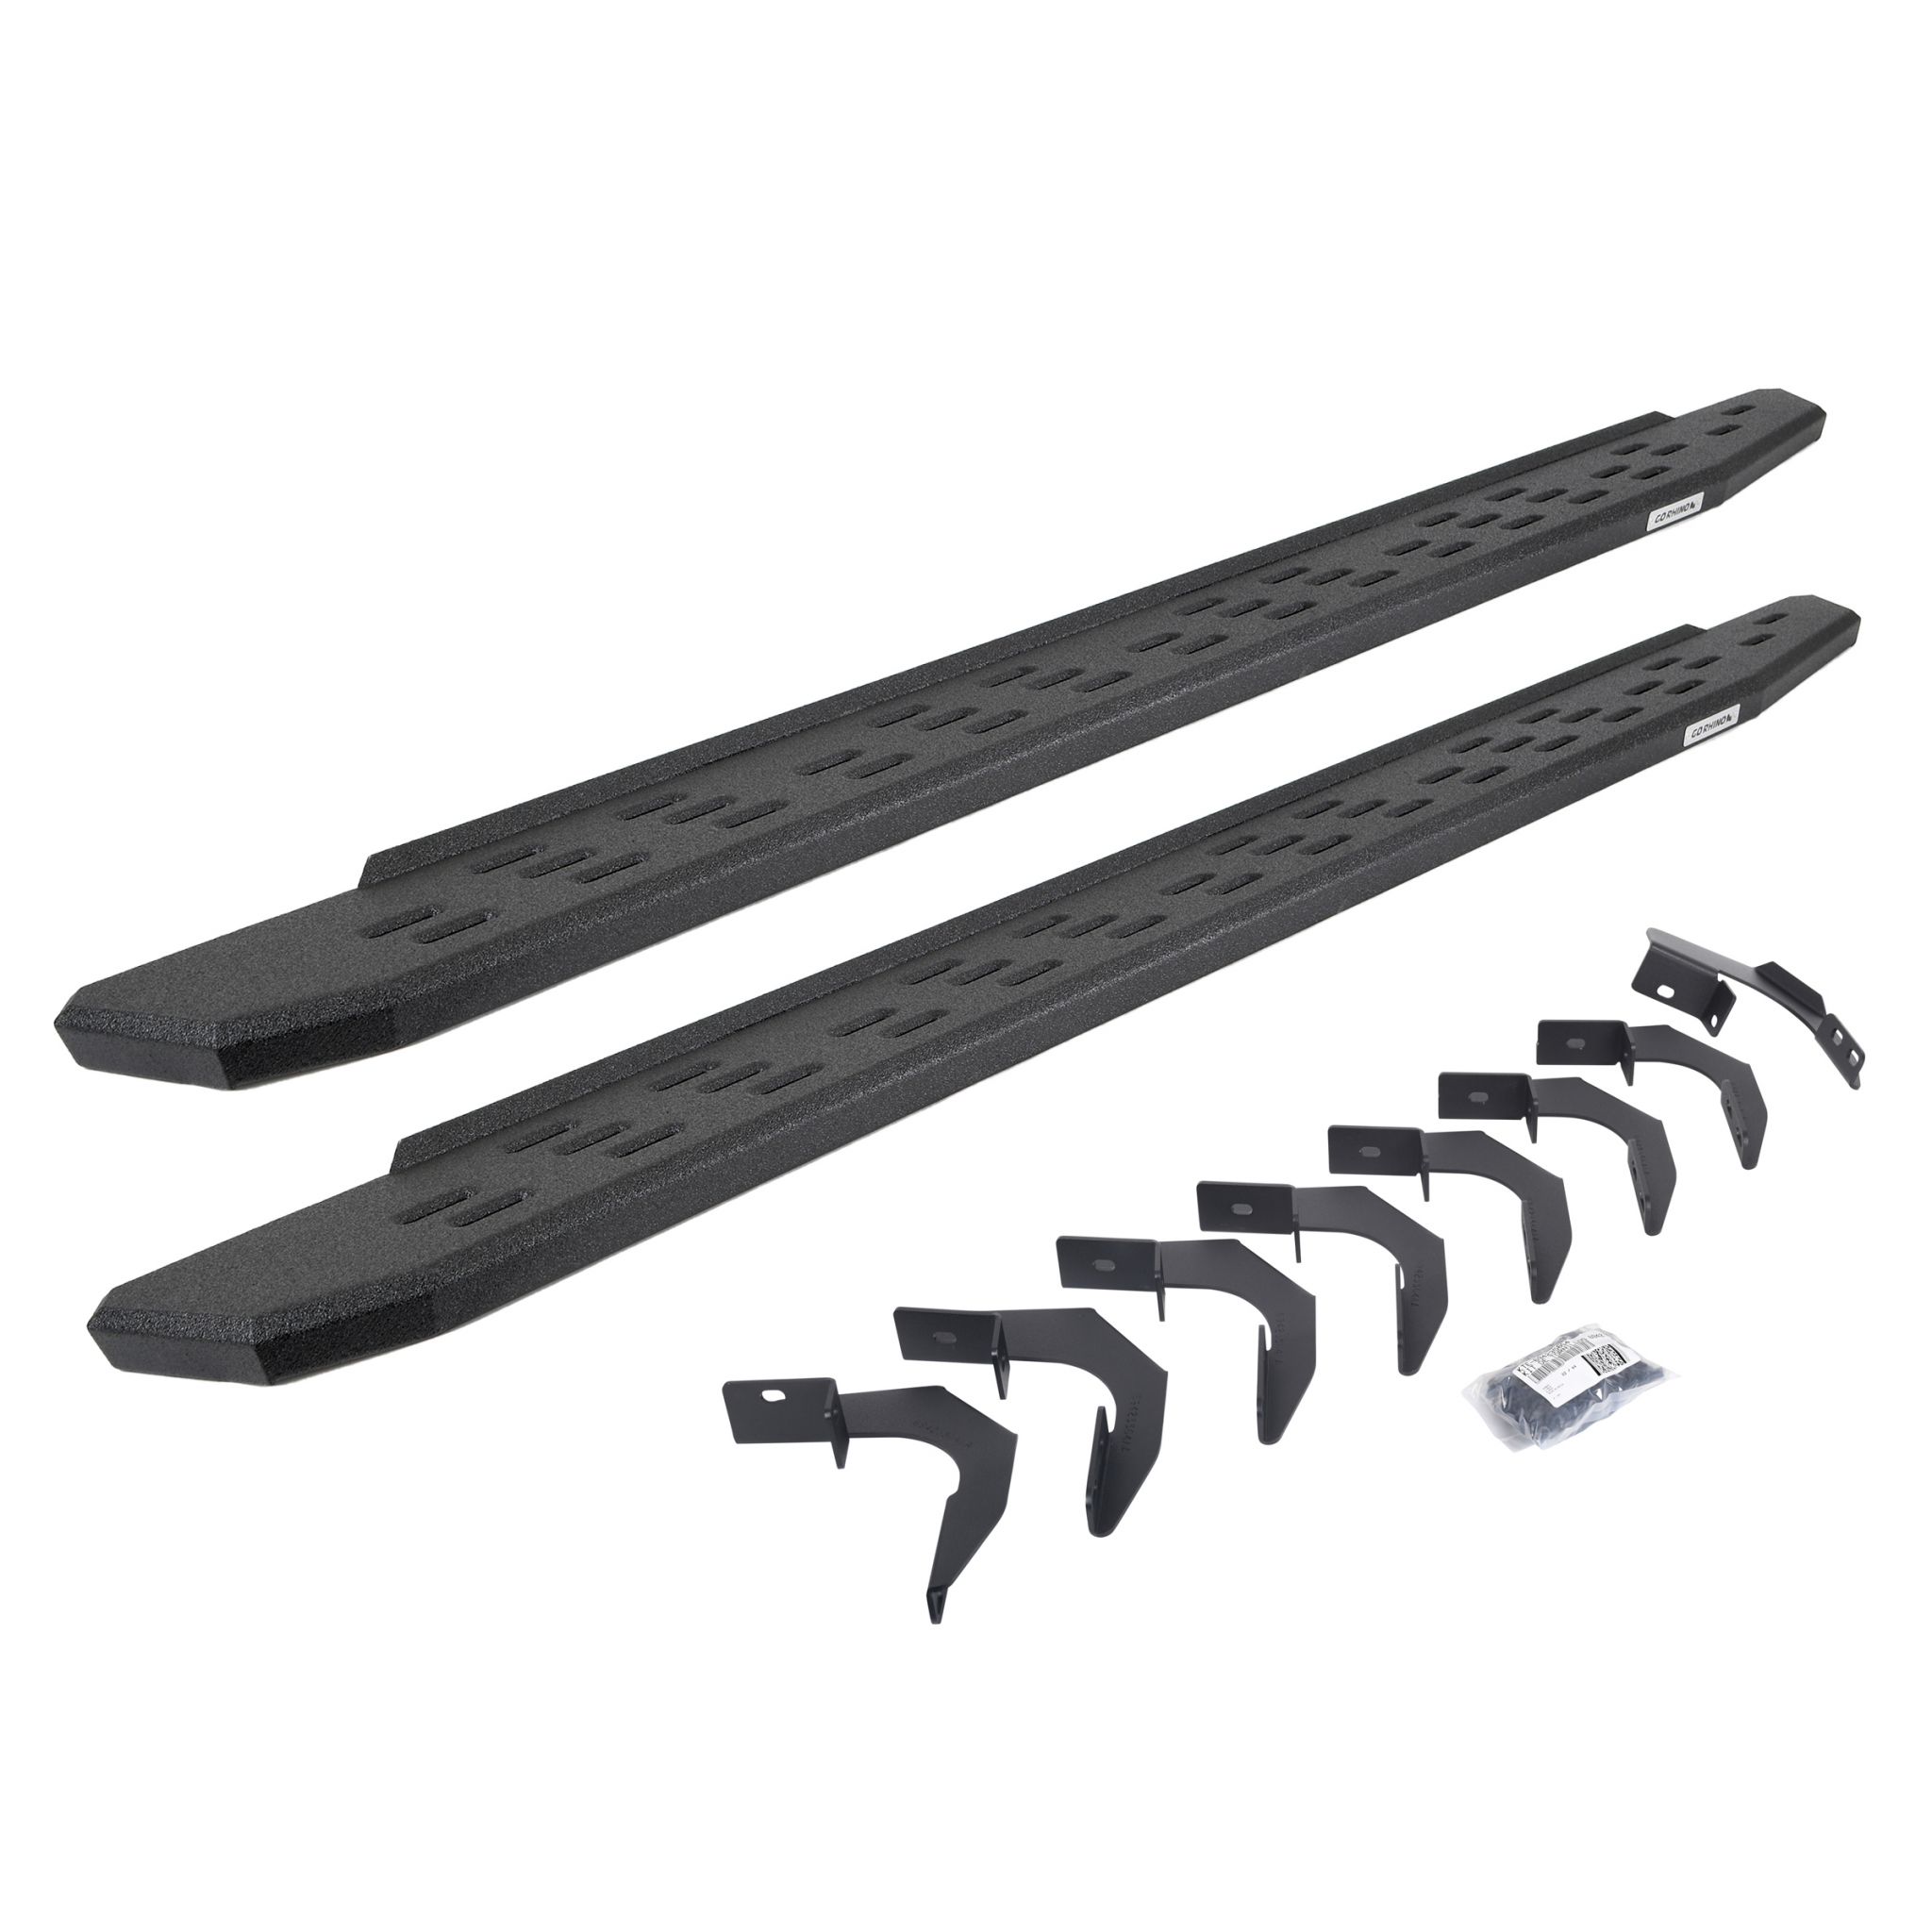 Go Rhino 69623580T - RB30 Running Boards with Mounting Bracket Kit - Protective Bedliner Coating